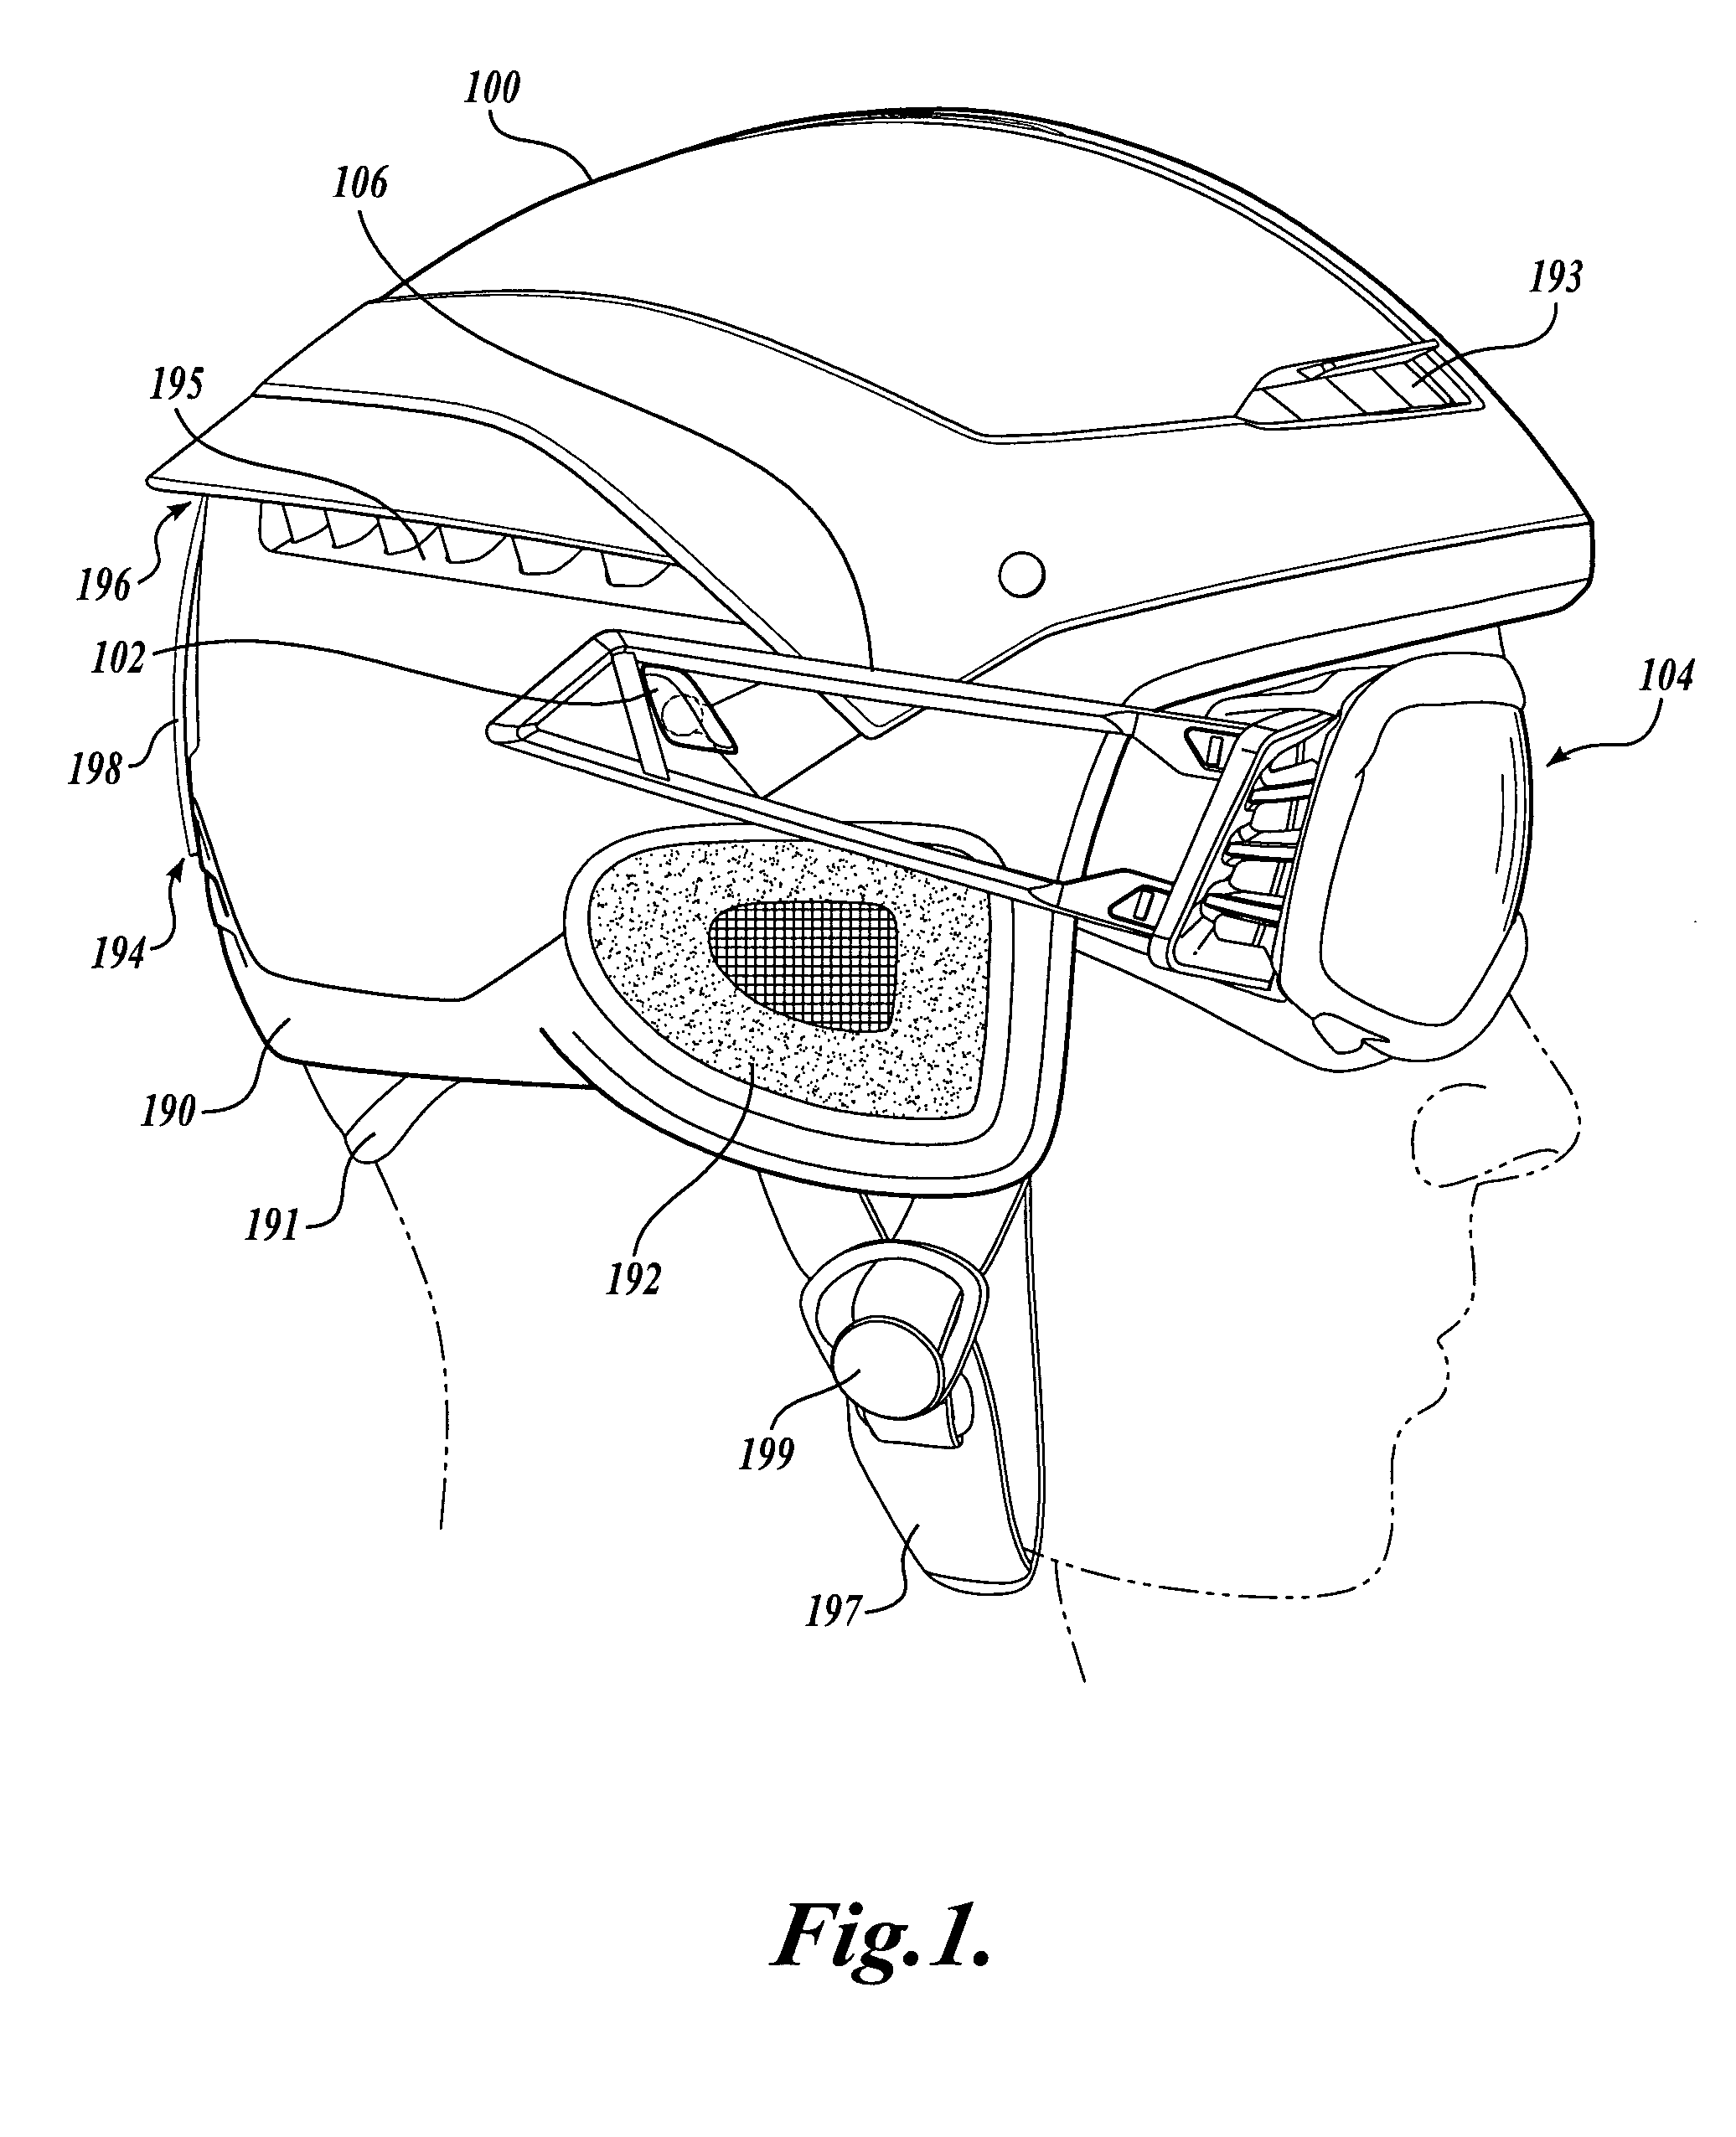 Banded goggles for a winter sports helmet